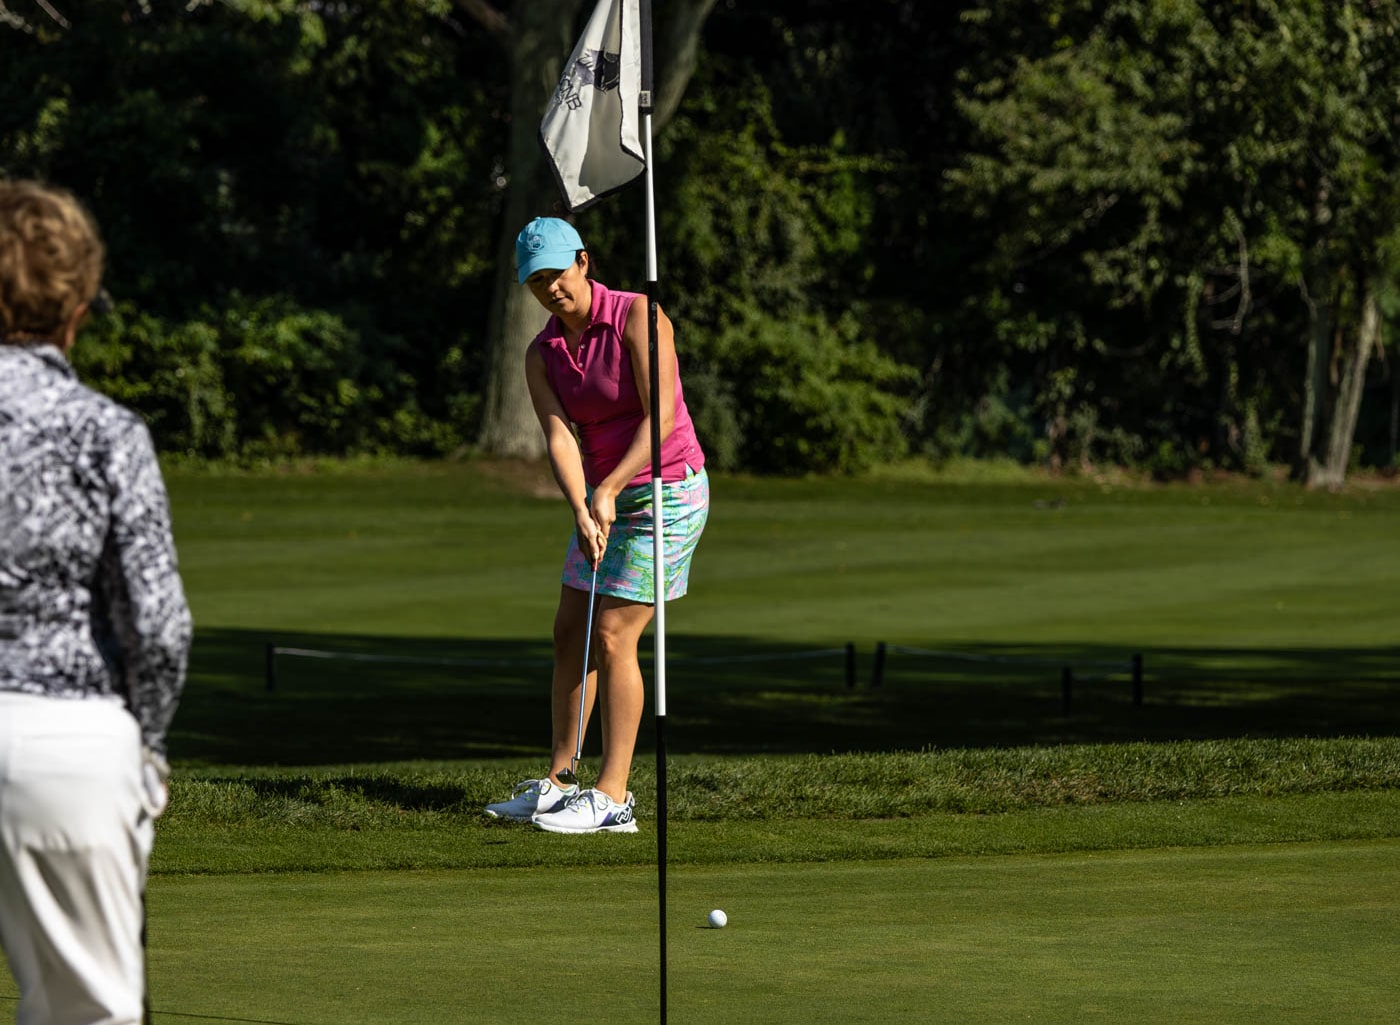 Country-Club-Of-New-Bedford FB-2023-Womens-FB-Gallery August-2023-Country-Club-Of-New-Bedford-FB-2023-Womens-FB-Gallery August-2023-Womens-FB-Gallery-Tuesday-Photos-Image-3